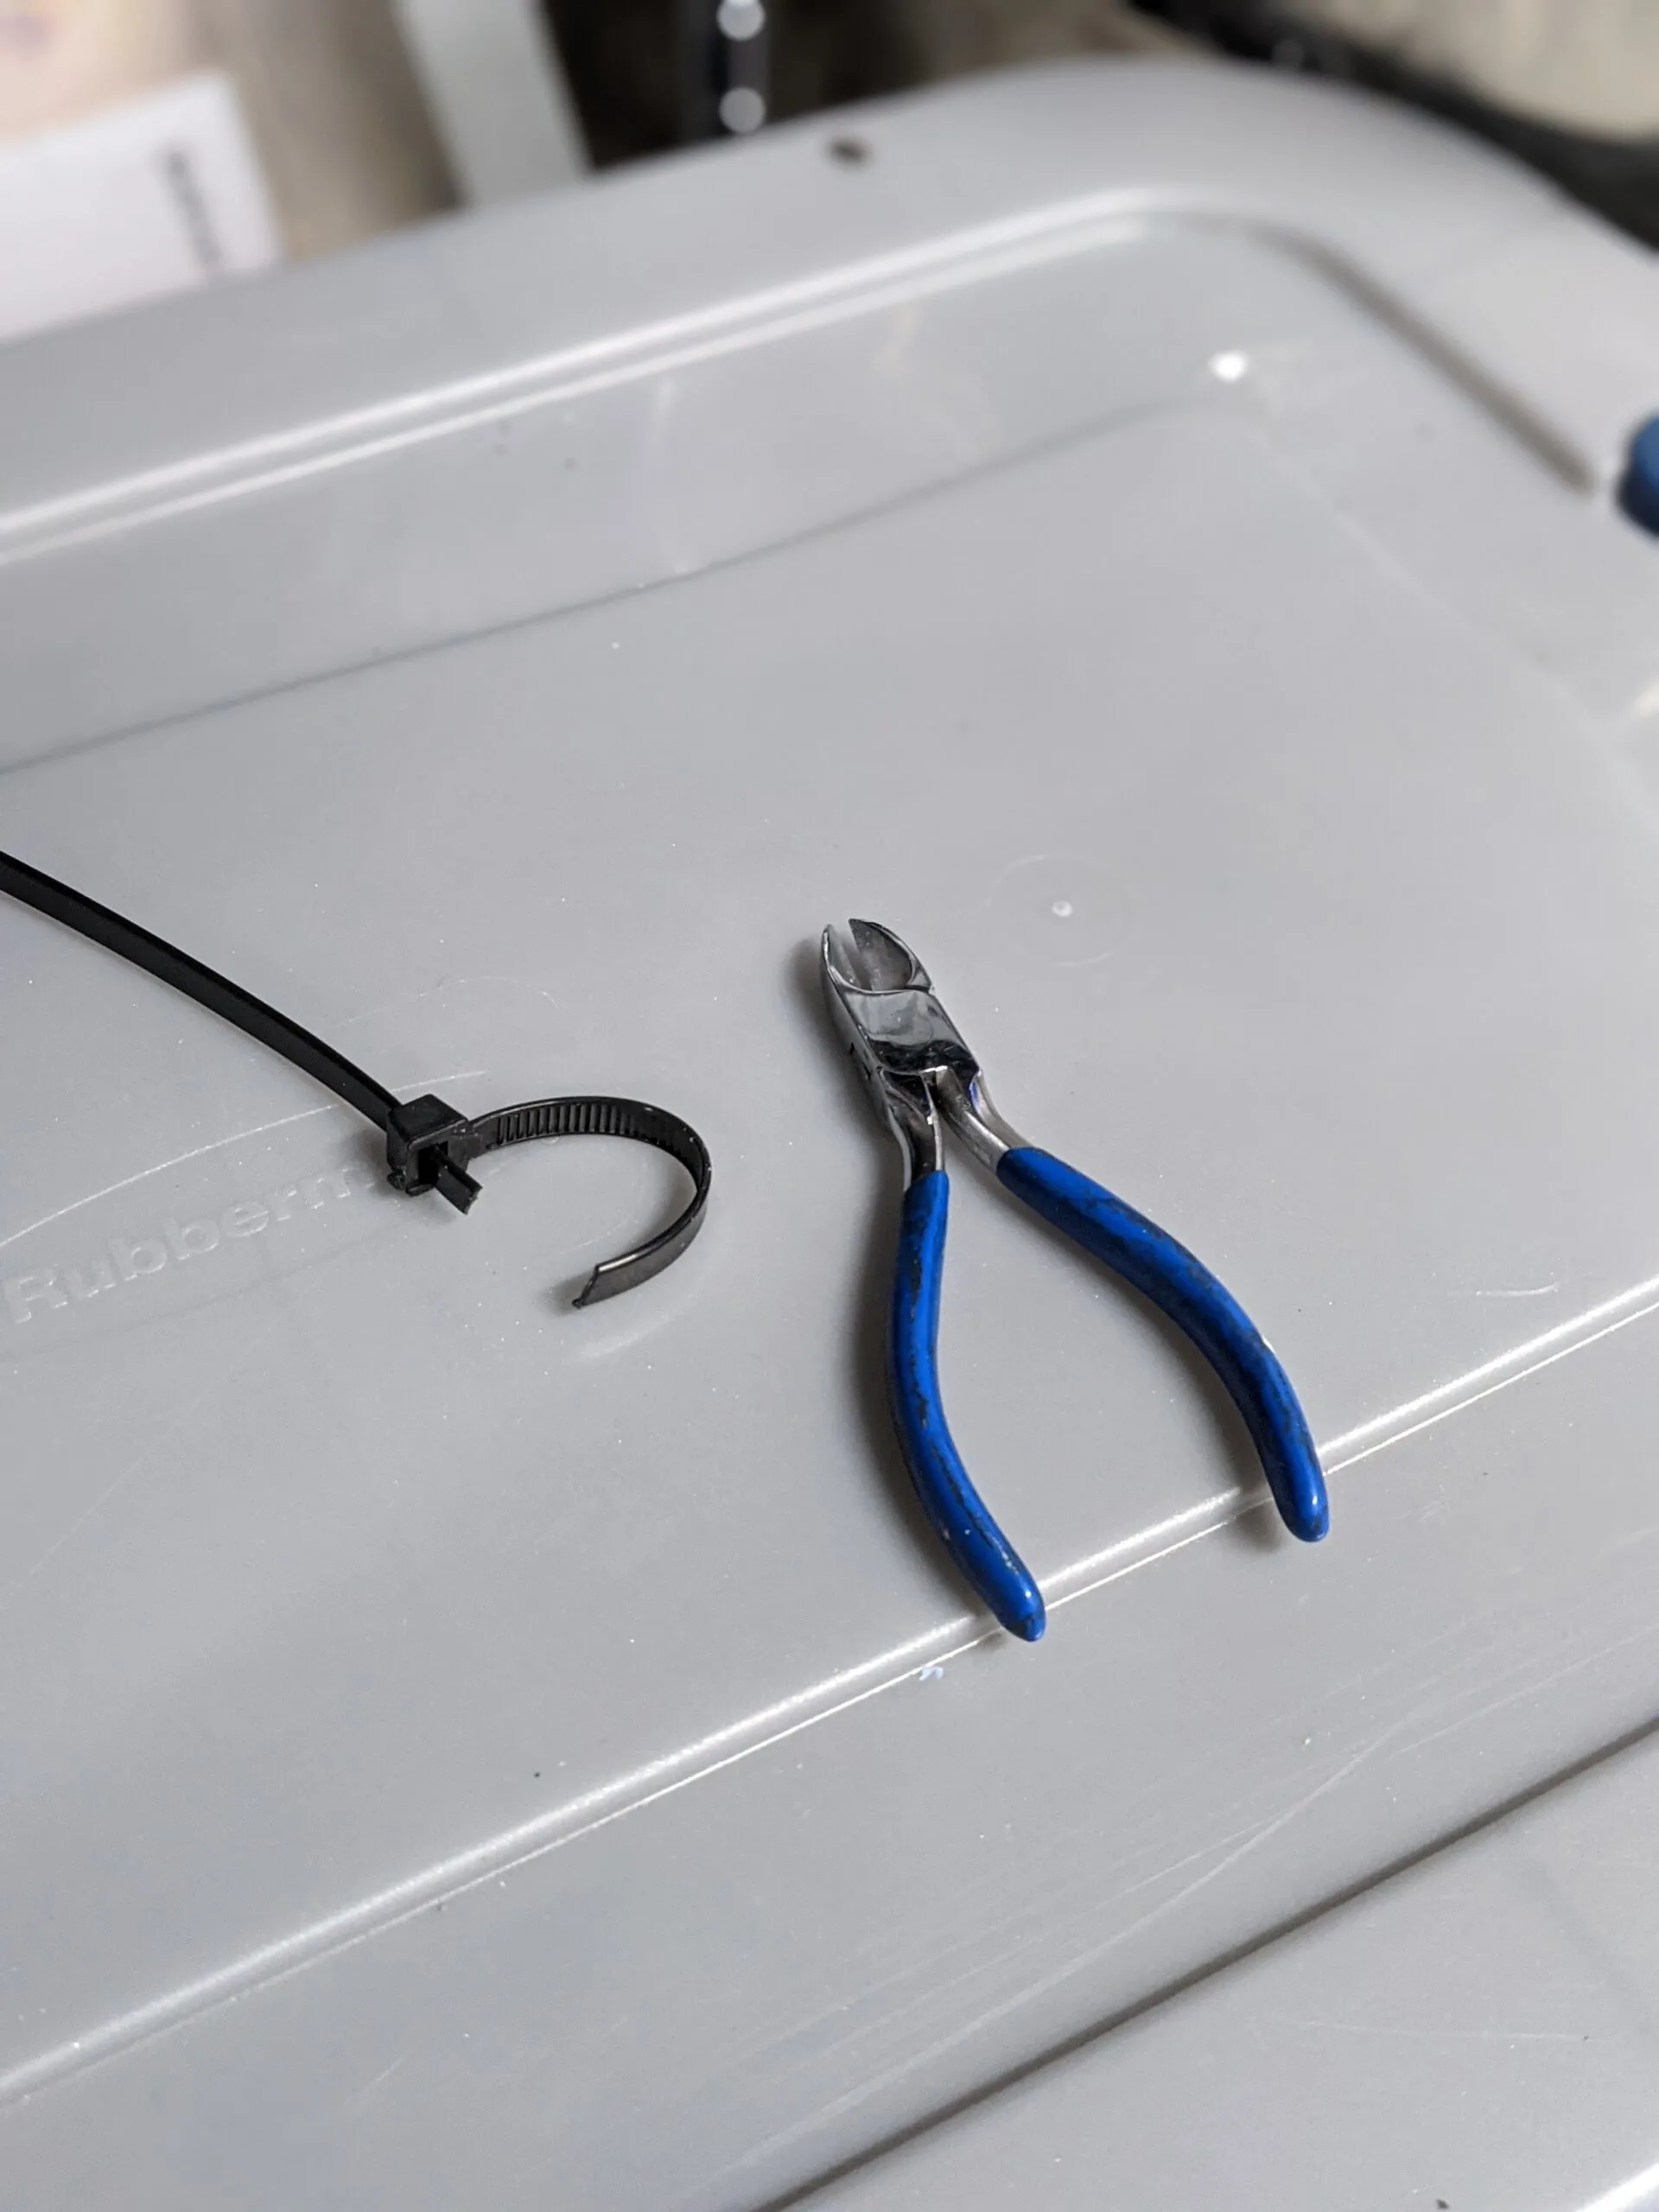 Wire cutter pictured next to a cut heavy duty zip tie, on top of a plastic storage tote.